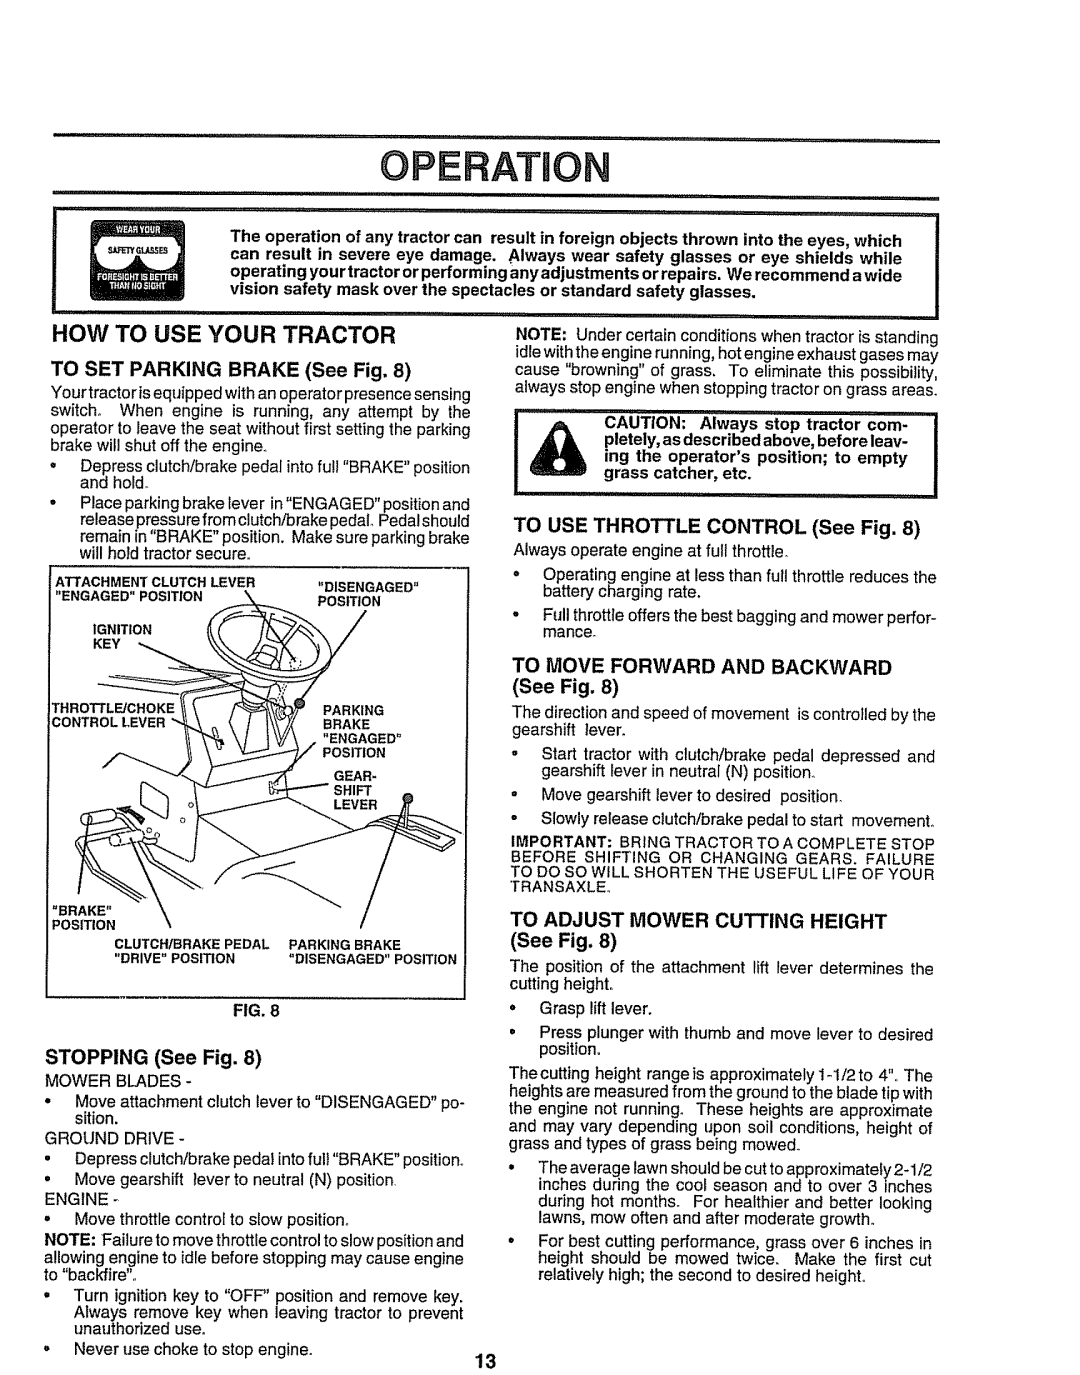 Sears 917.258473 Operati, How To Use Your Tractor, TO SET PARKING BRAKE See Fig, TO USE THROTTLE CONTROL See Fig 